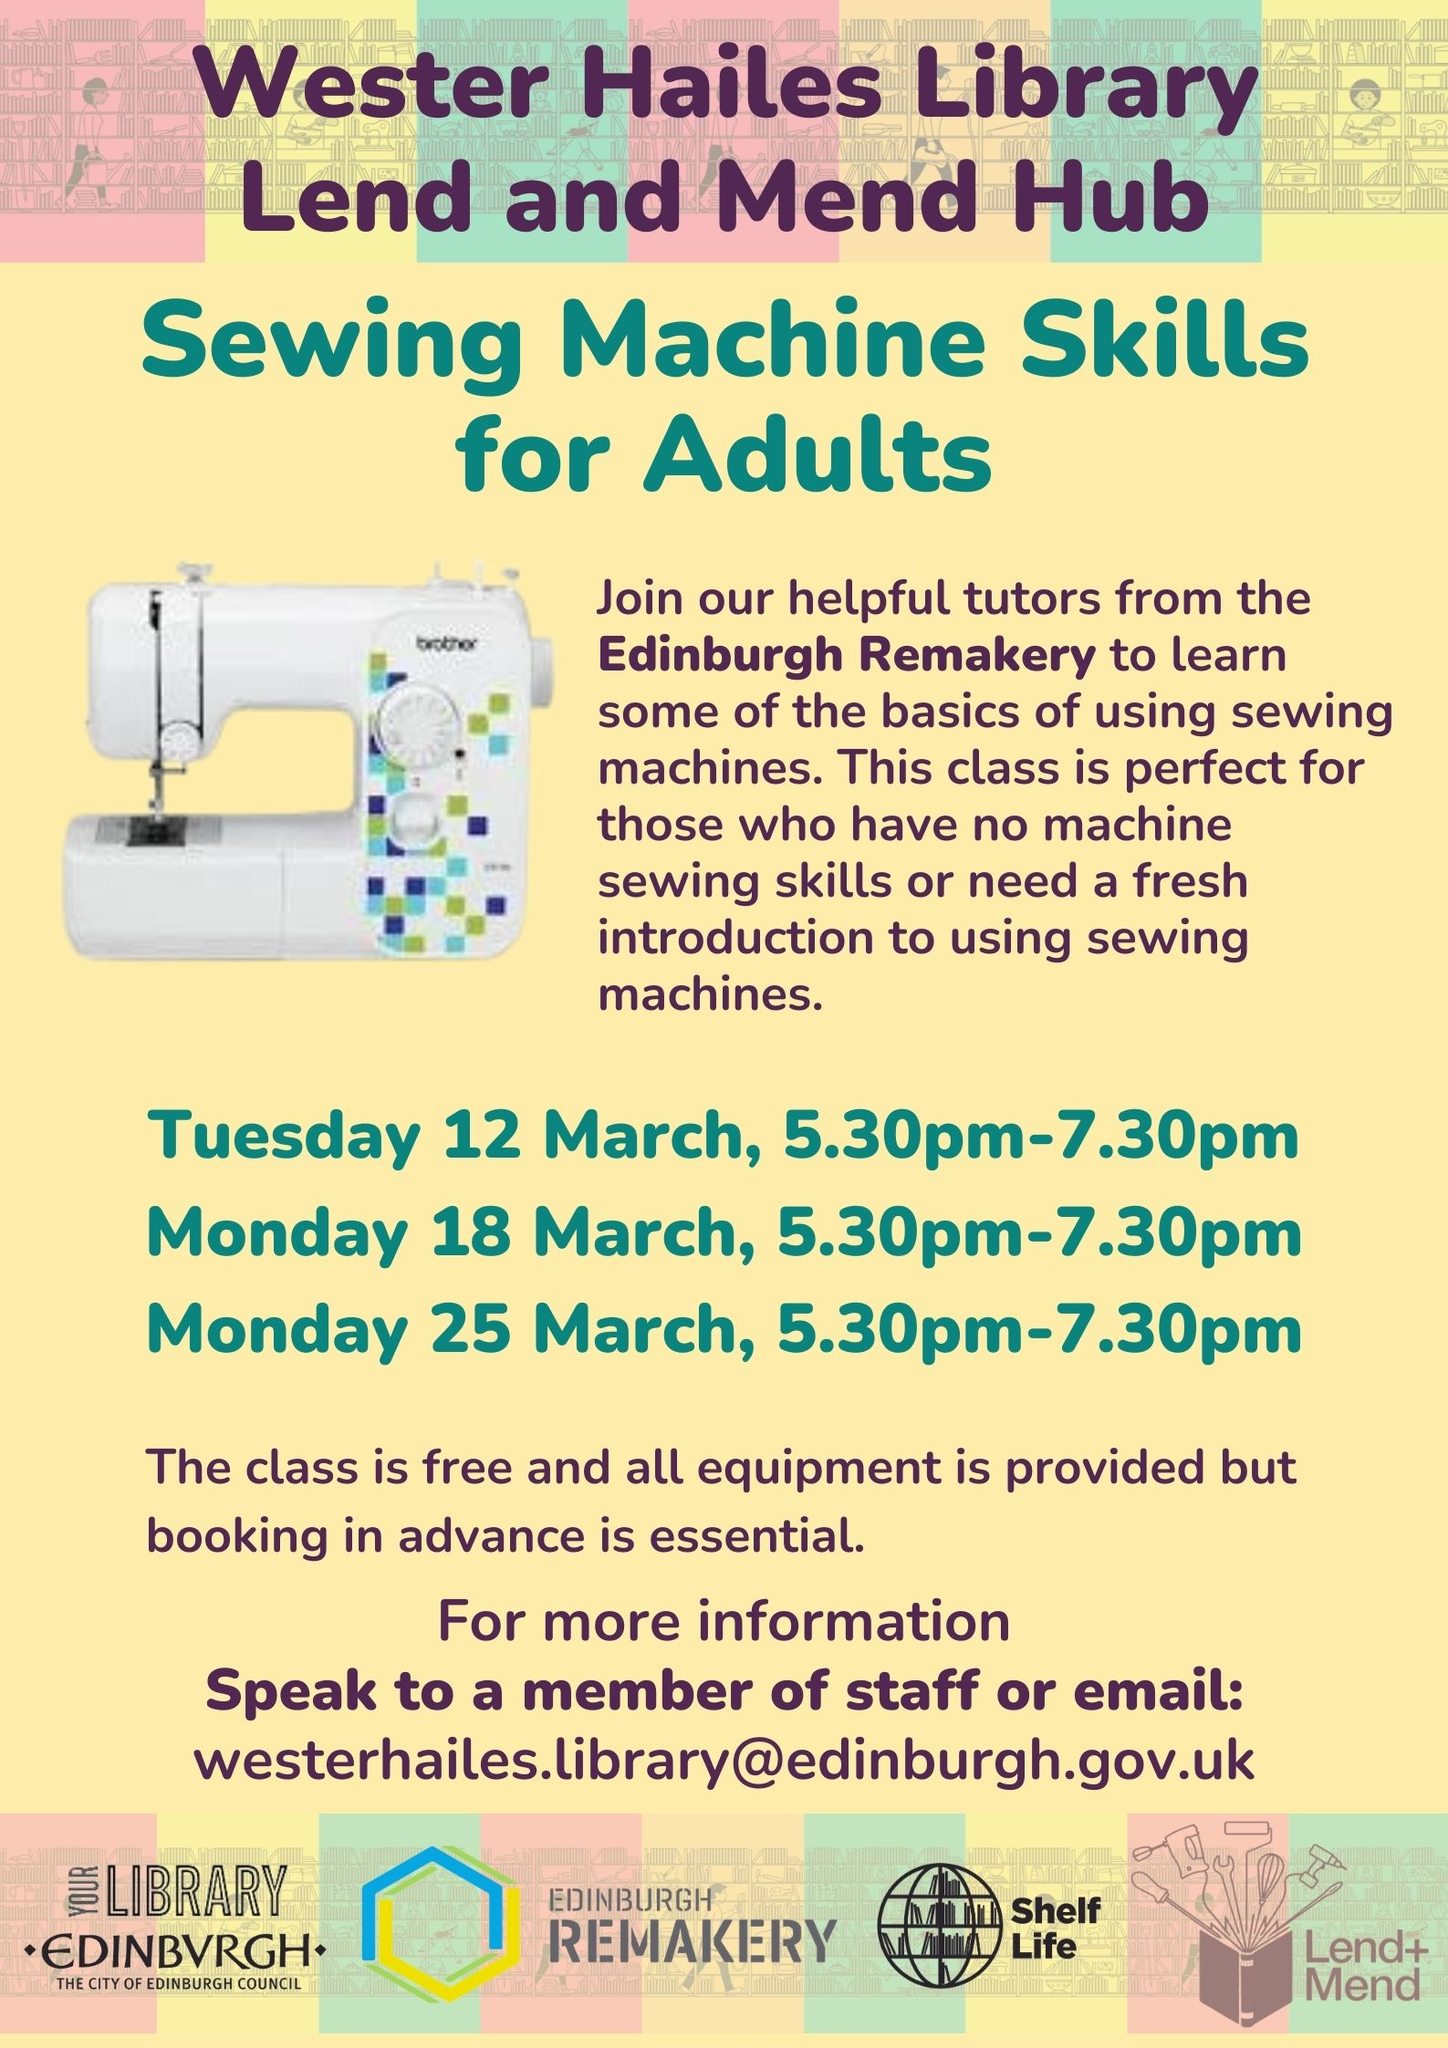 Sewing Machine Skills for Adults